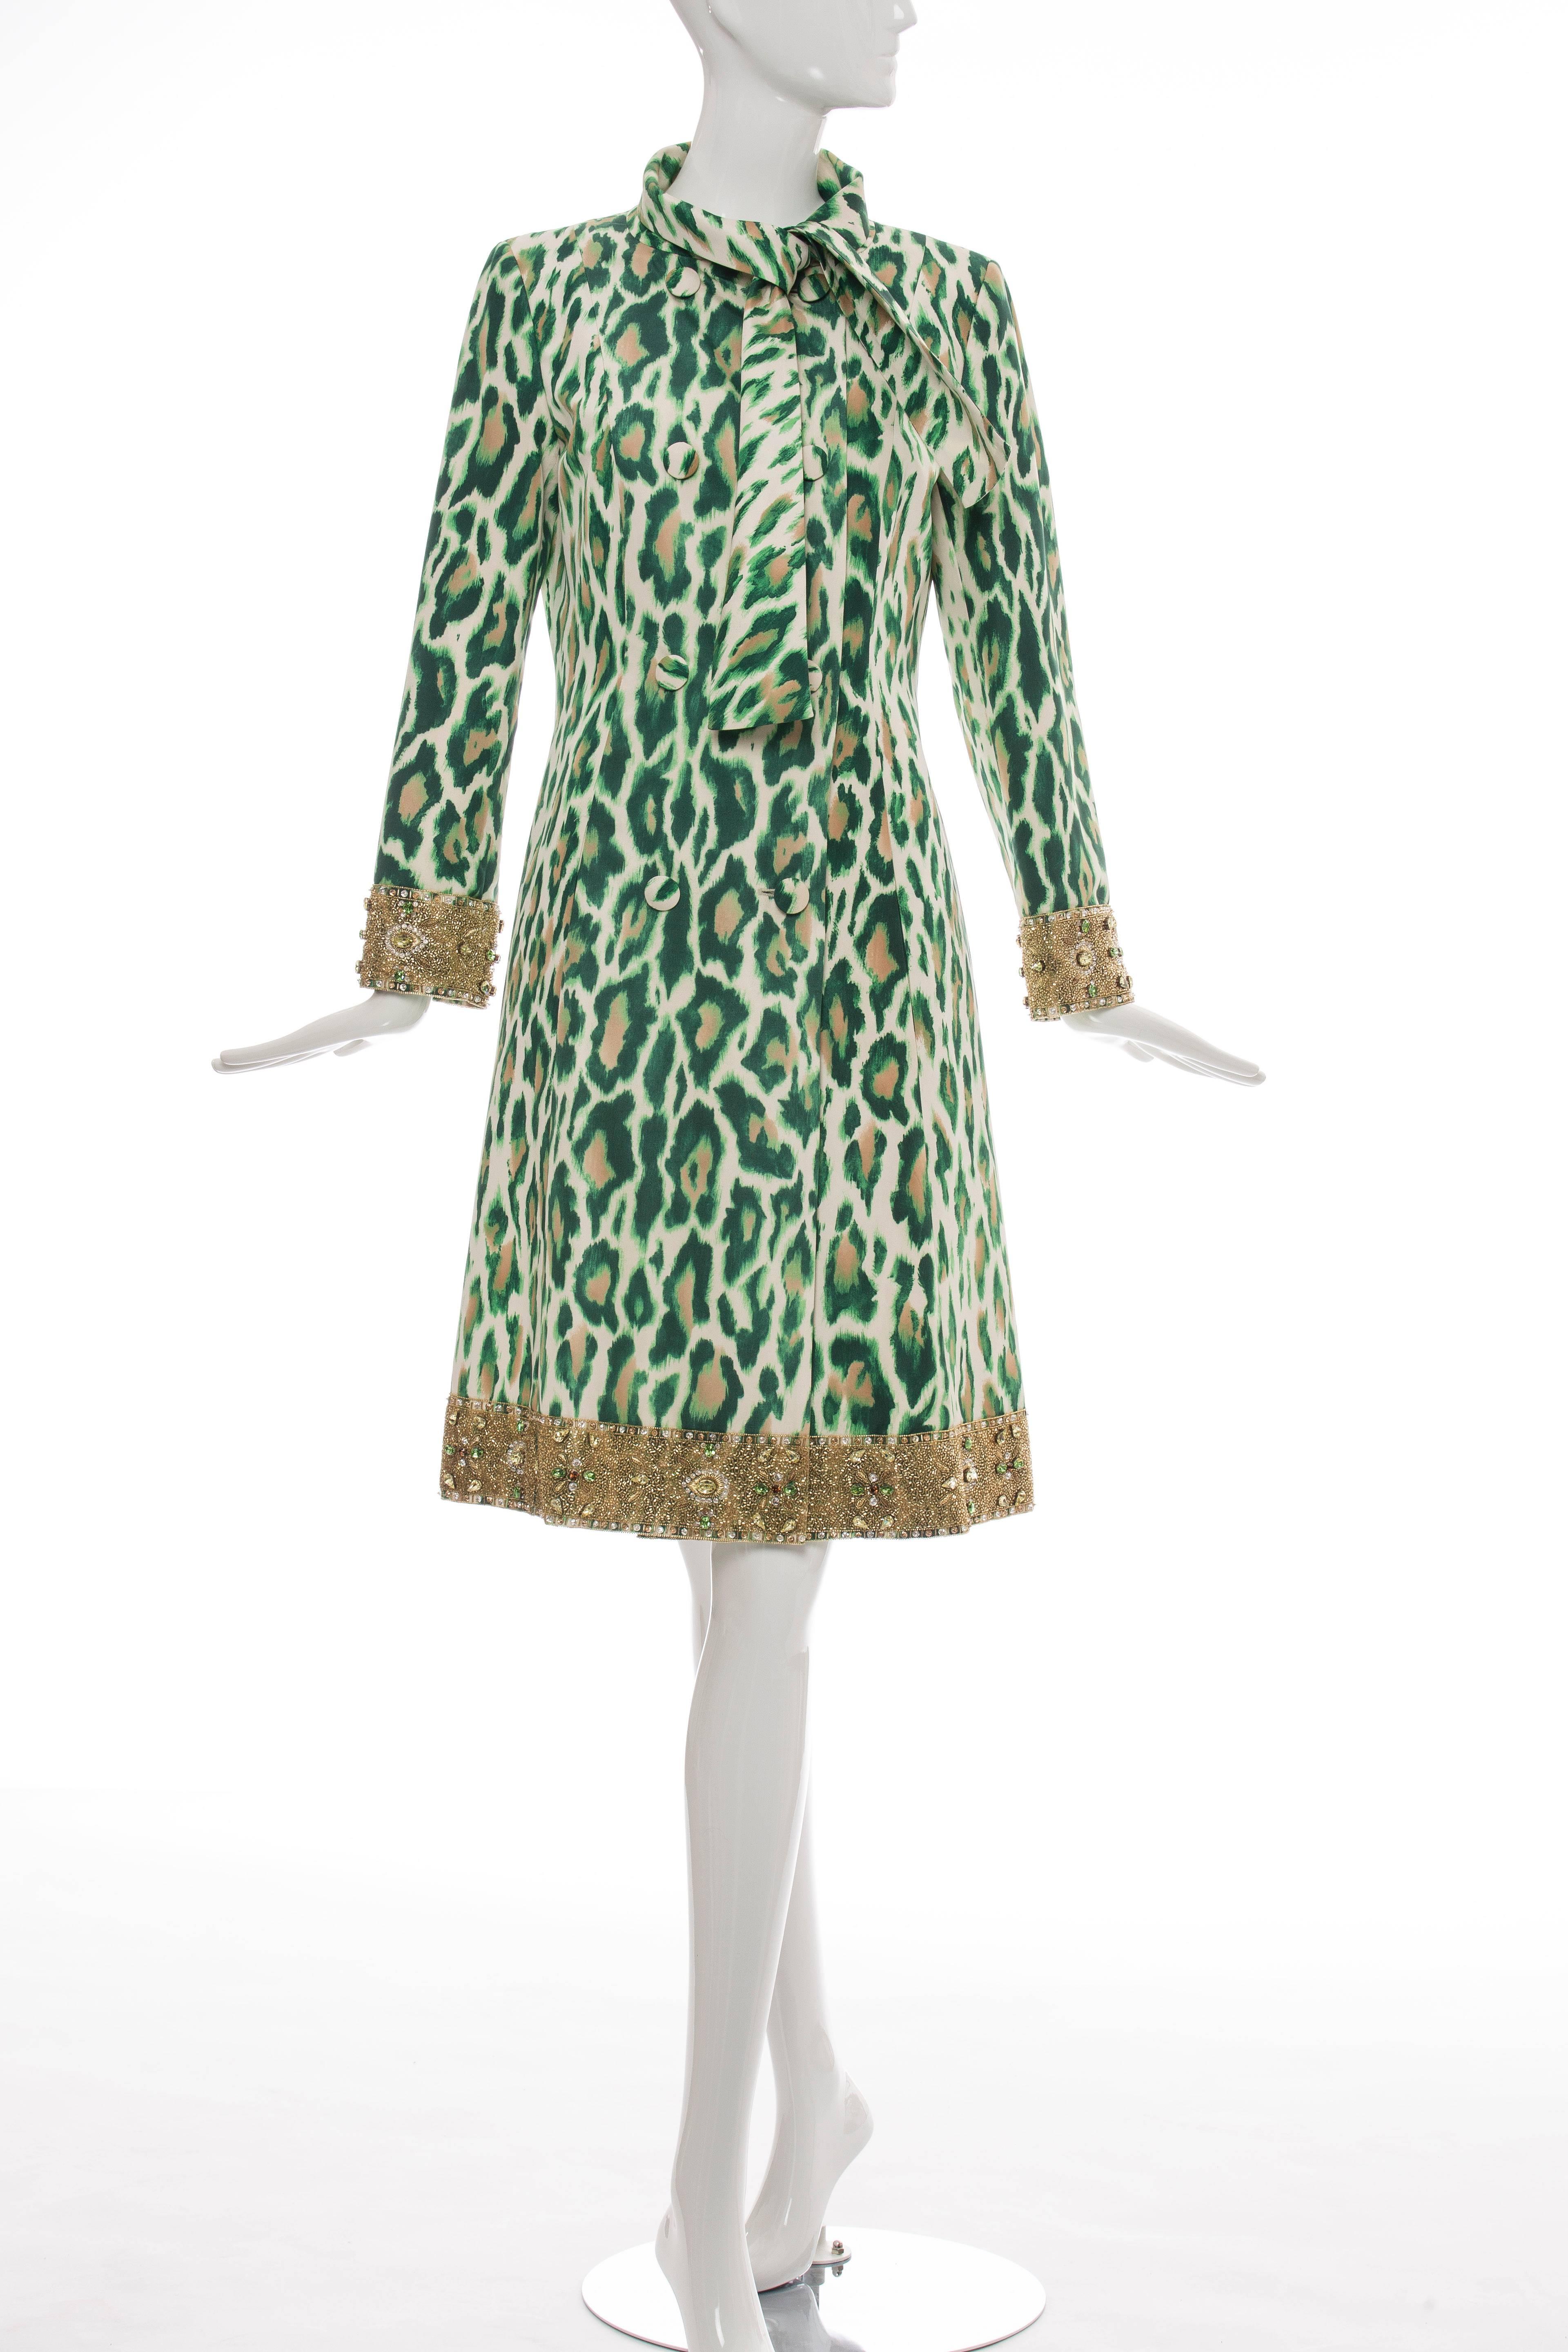  Christian Dior by John Galliano, Resort 2008, silk coat with dual seam pockets at hip, leopard print throughout, gold-tone bead trim at sleeve and bottom hem, tie accent at neck and exposed tonal button closures at front.

FR 38
US 6

Bust